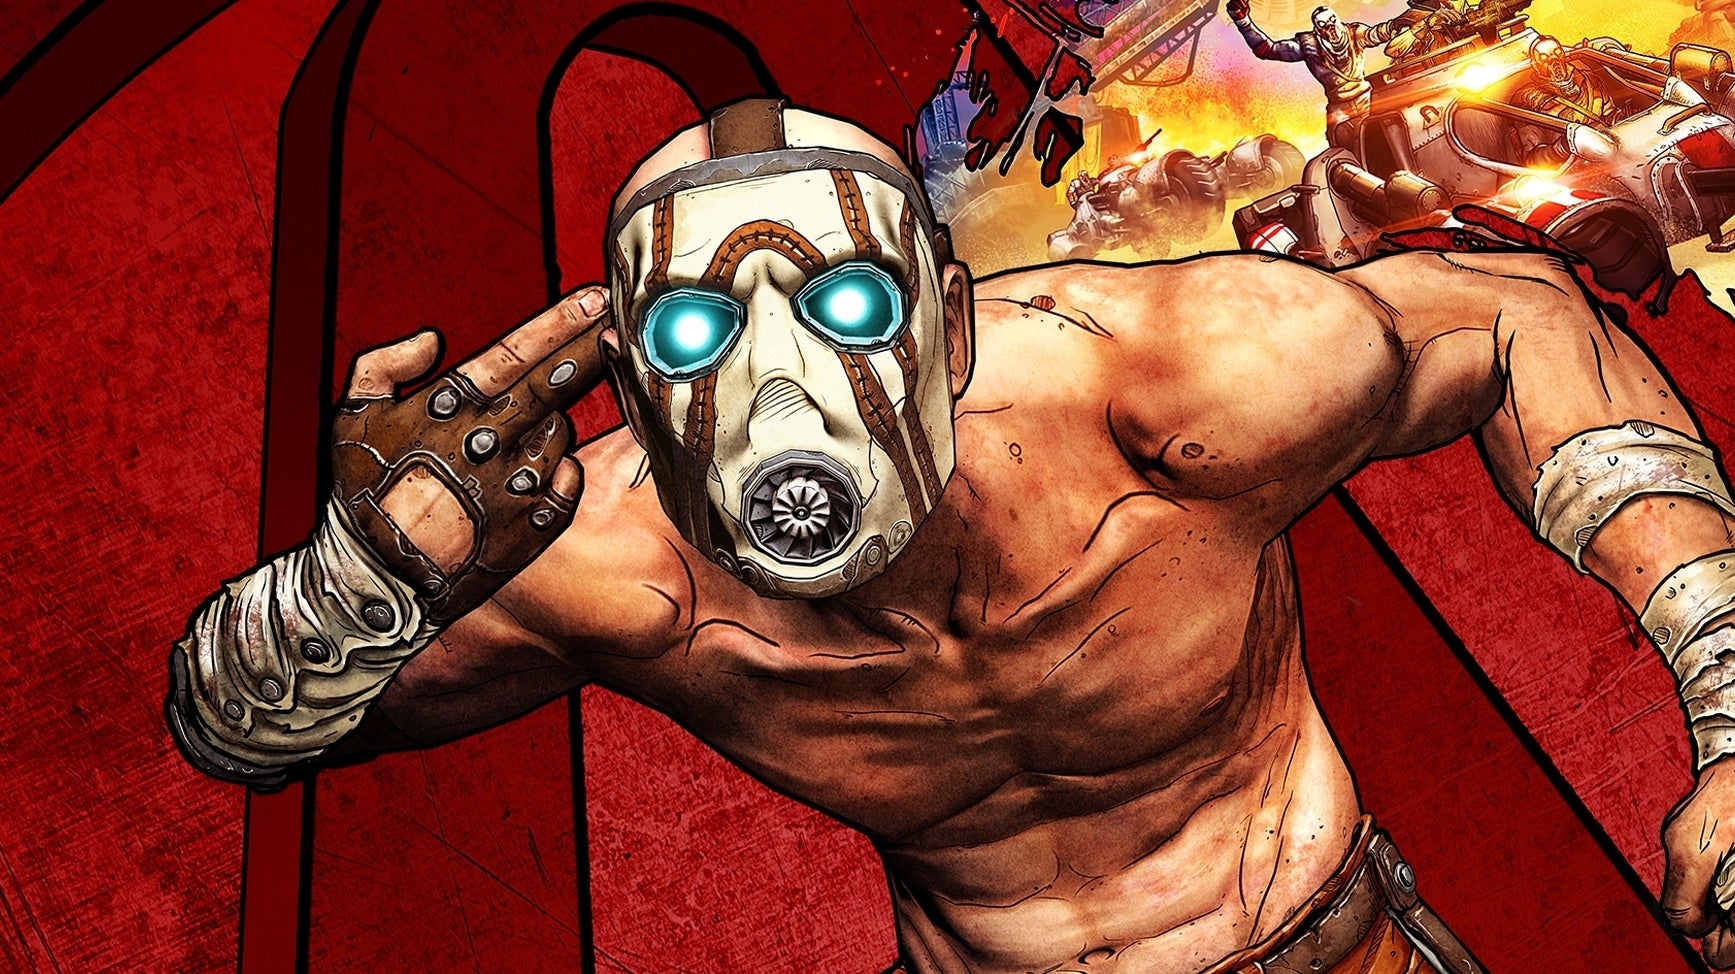 Image for Borderlands GOTY improves on the original, but consoles need more polish